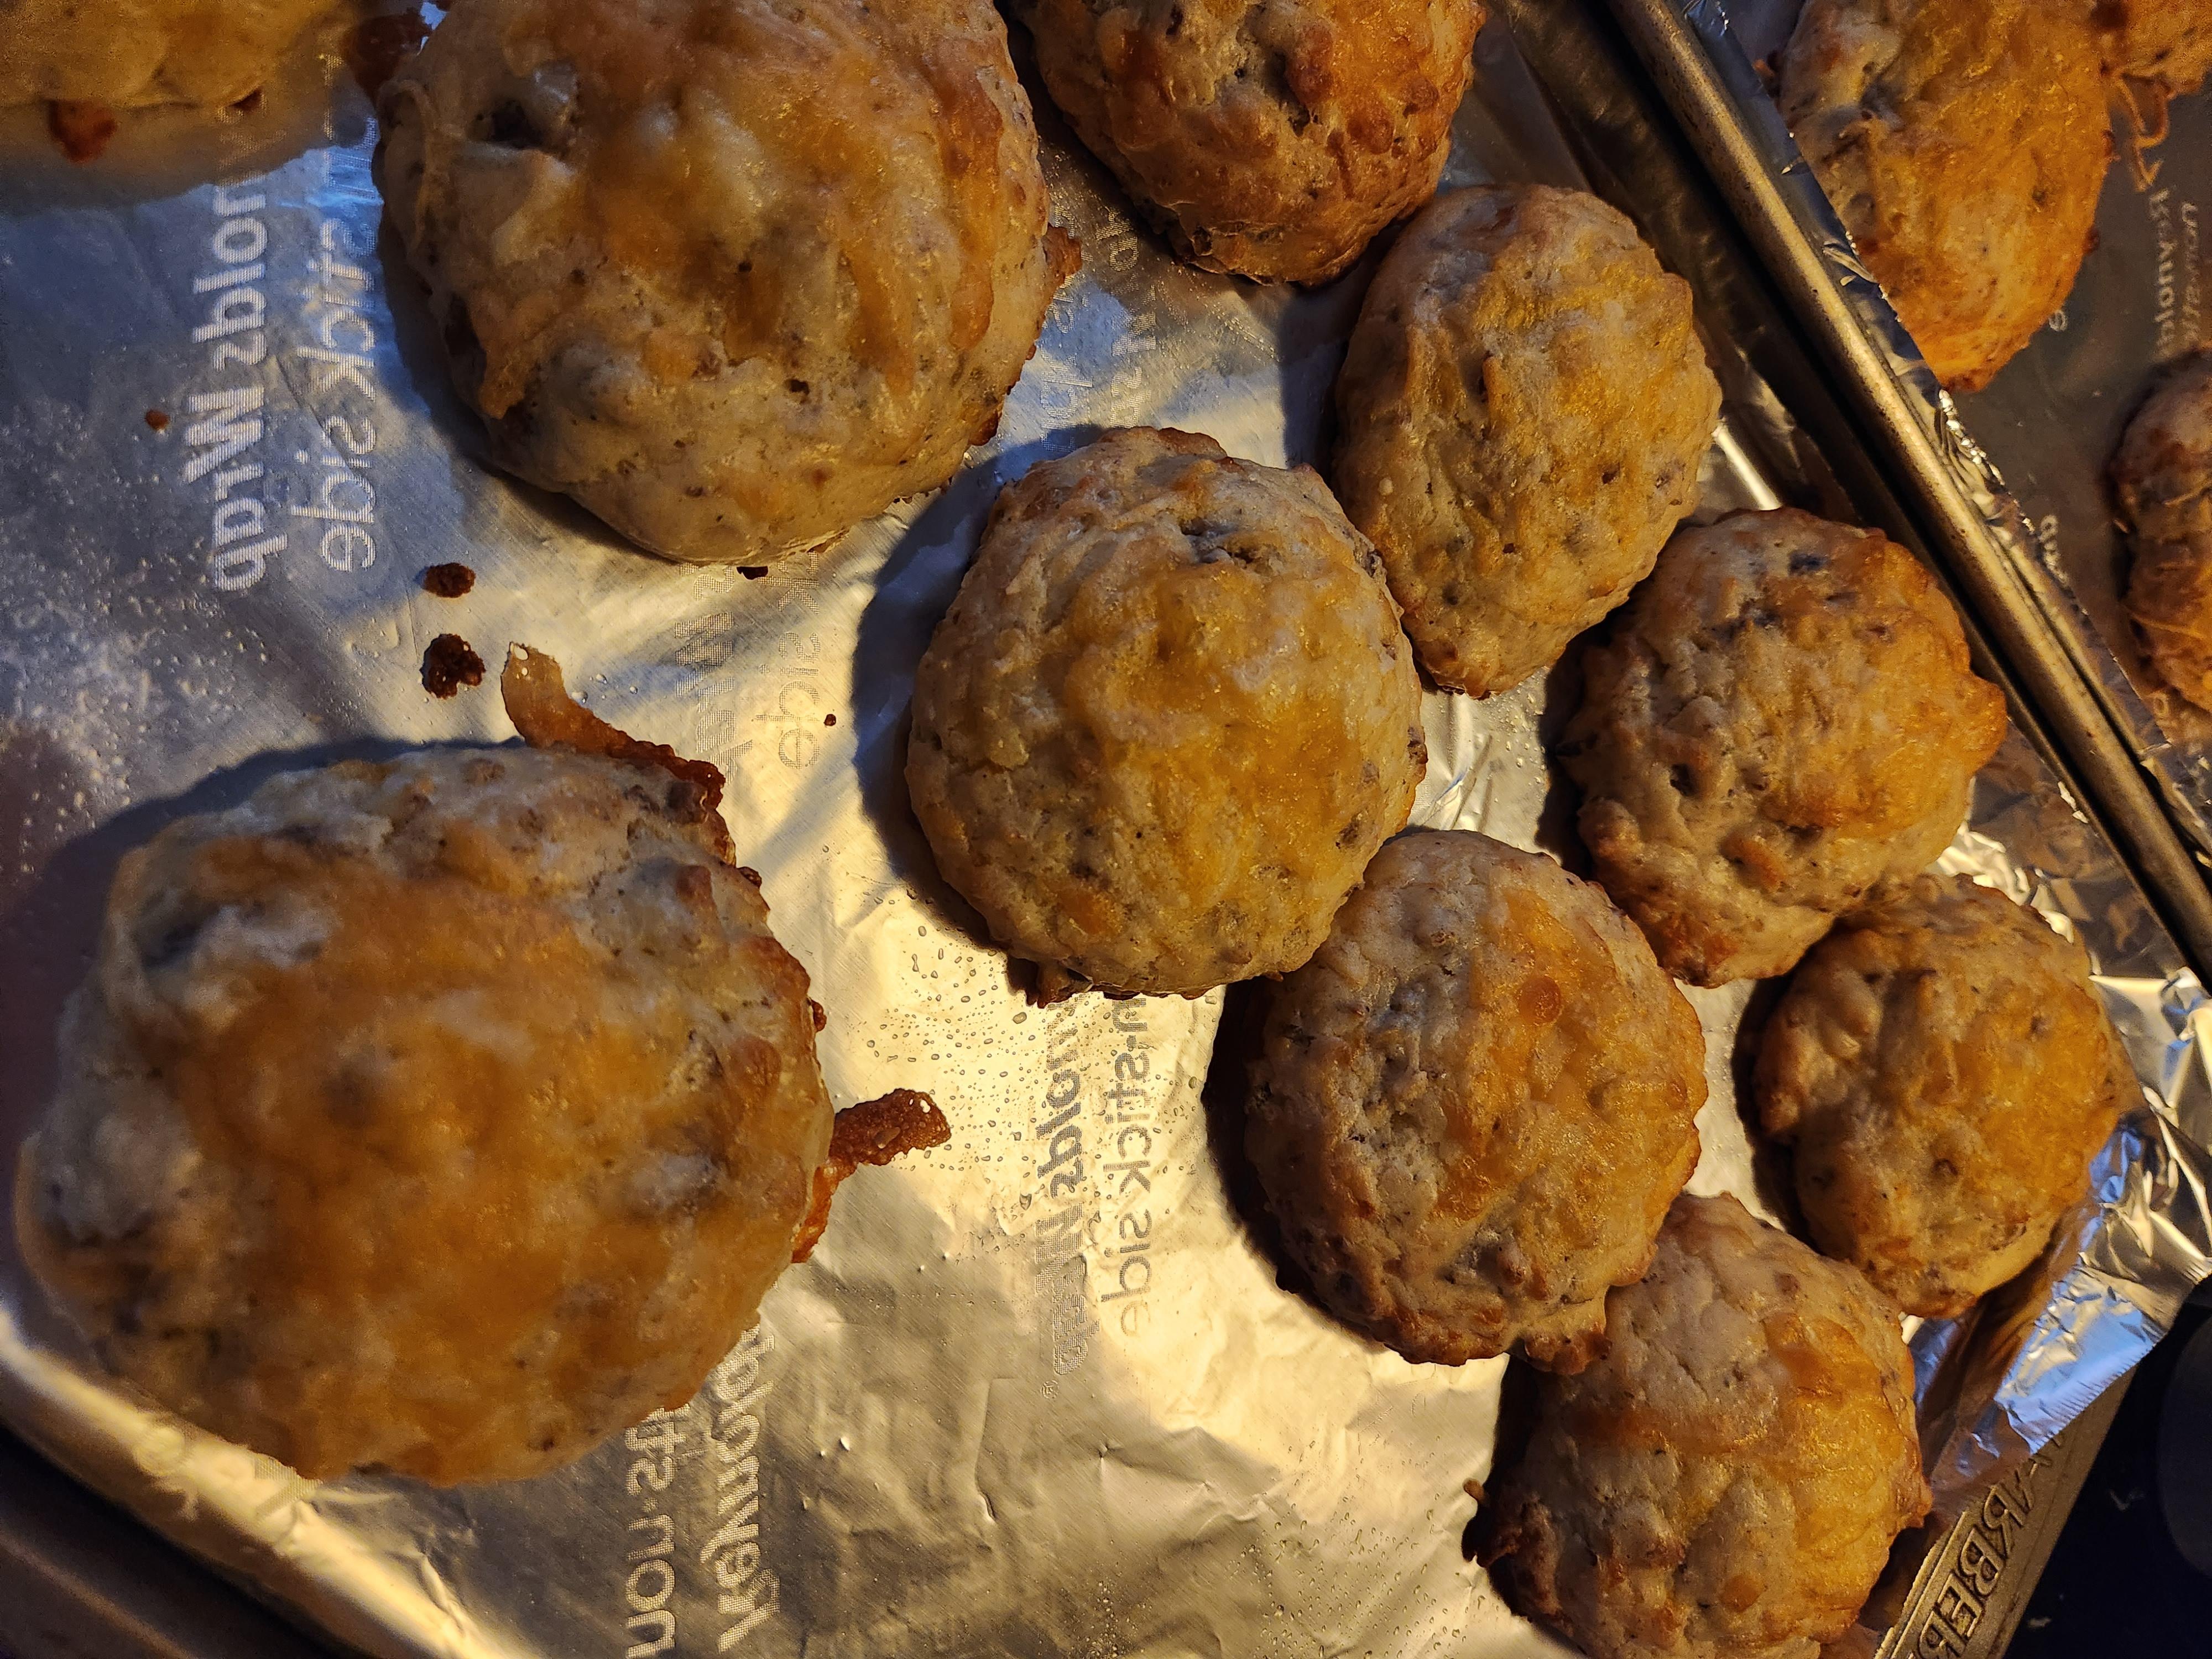 Sausage, Egg, and Cheese Breakfast Cookies